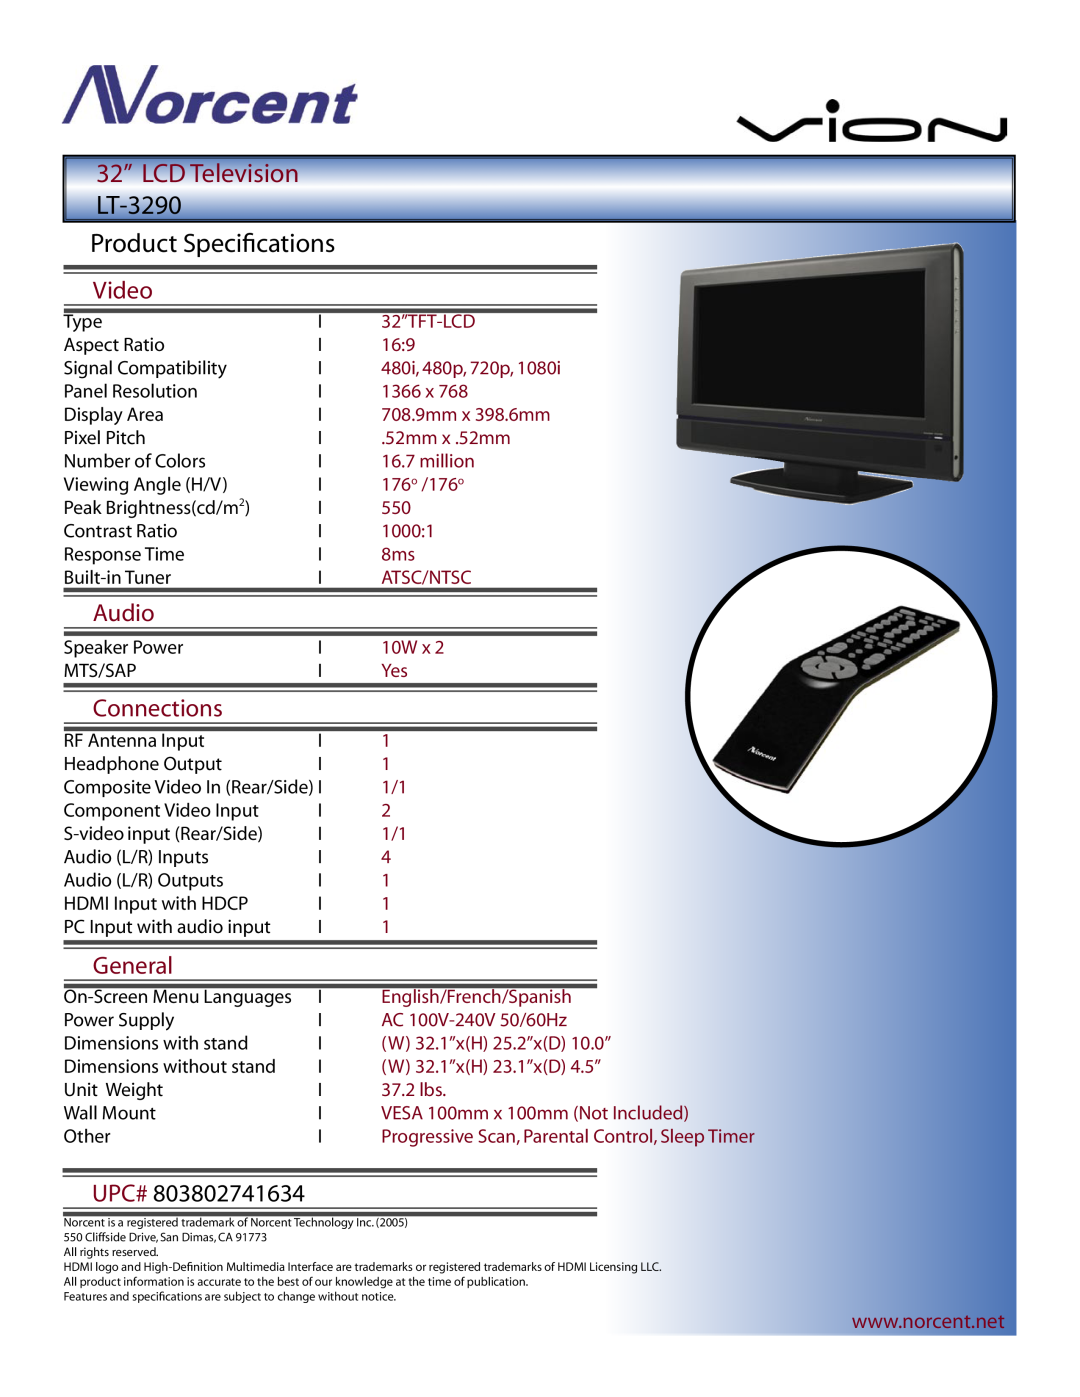 Norcent Technologies LT-3290 manual Product Speciﬁcations, 32” LCD Television, Video, Audio, Connections, General, Upc# 